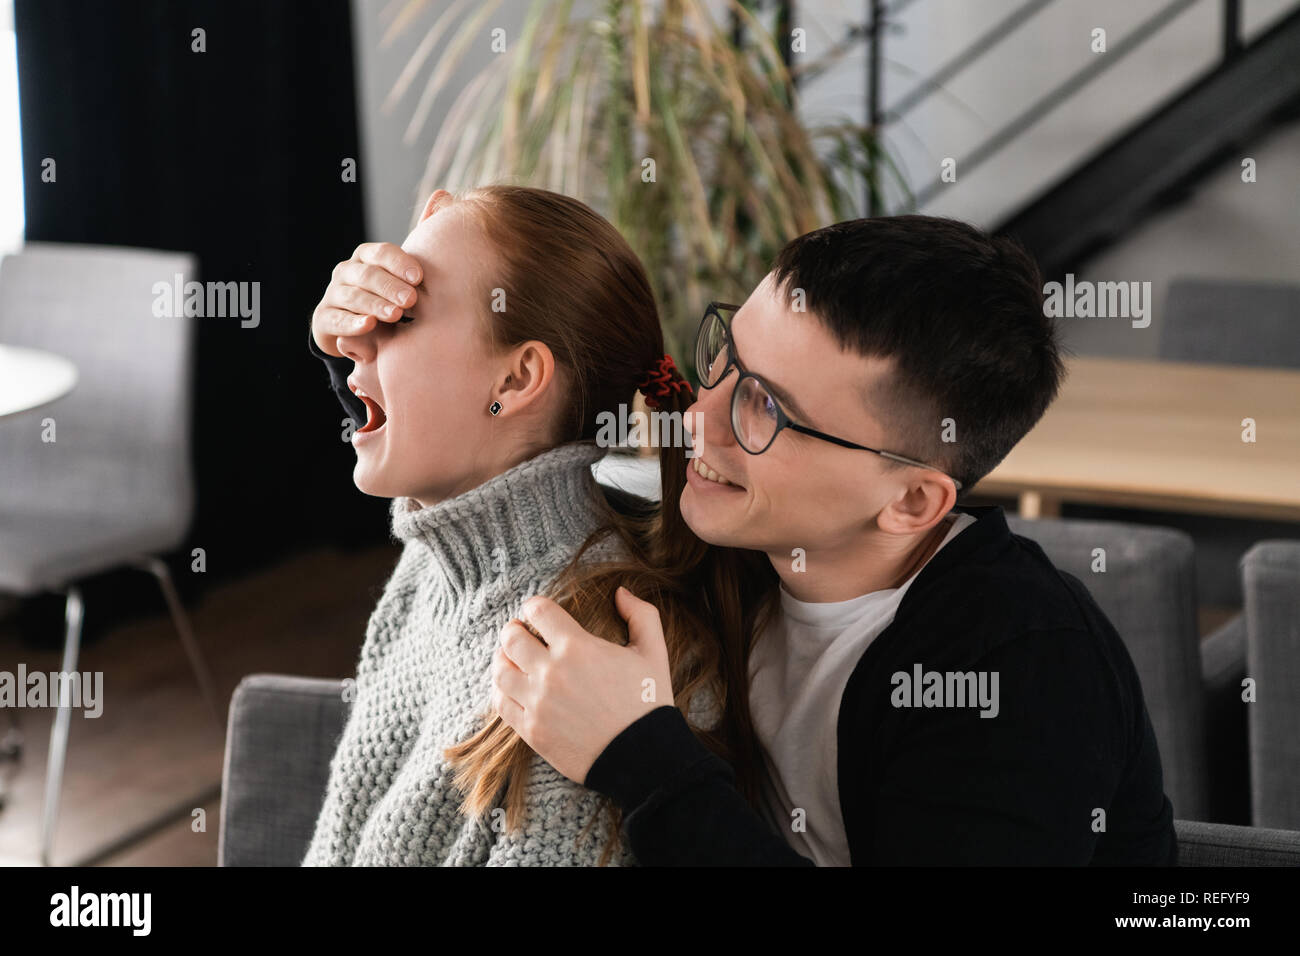 Surprise Beautiful romantic couple in cafe. Man is covering his girlfriend's eyes while she waiting for a surprise Stock Photo